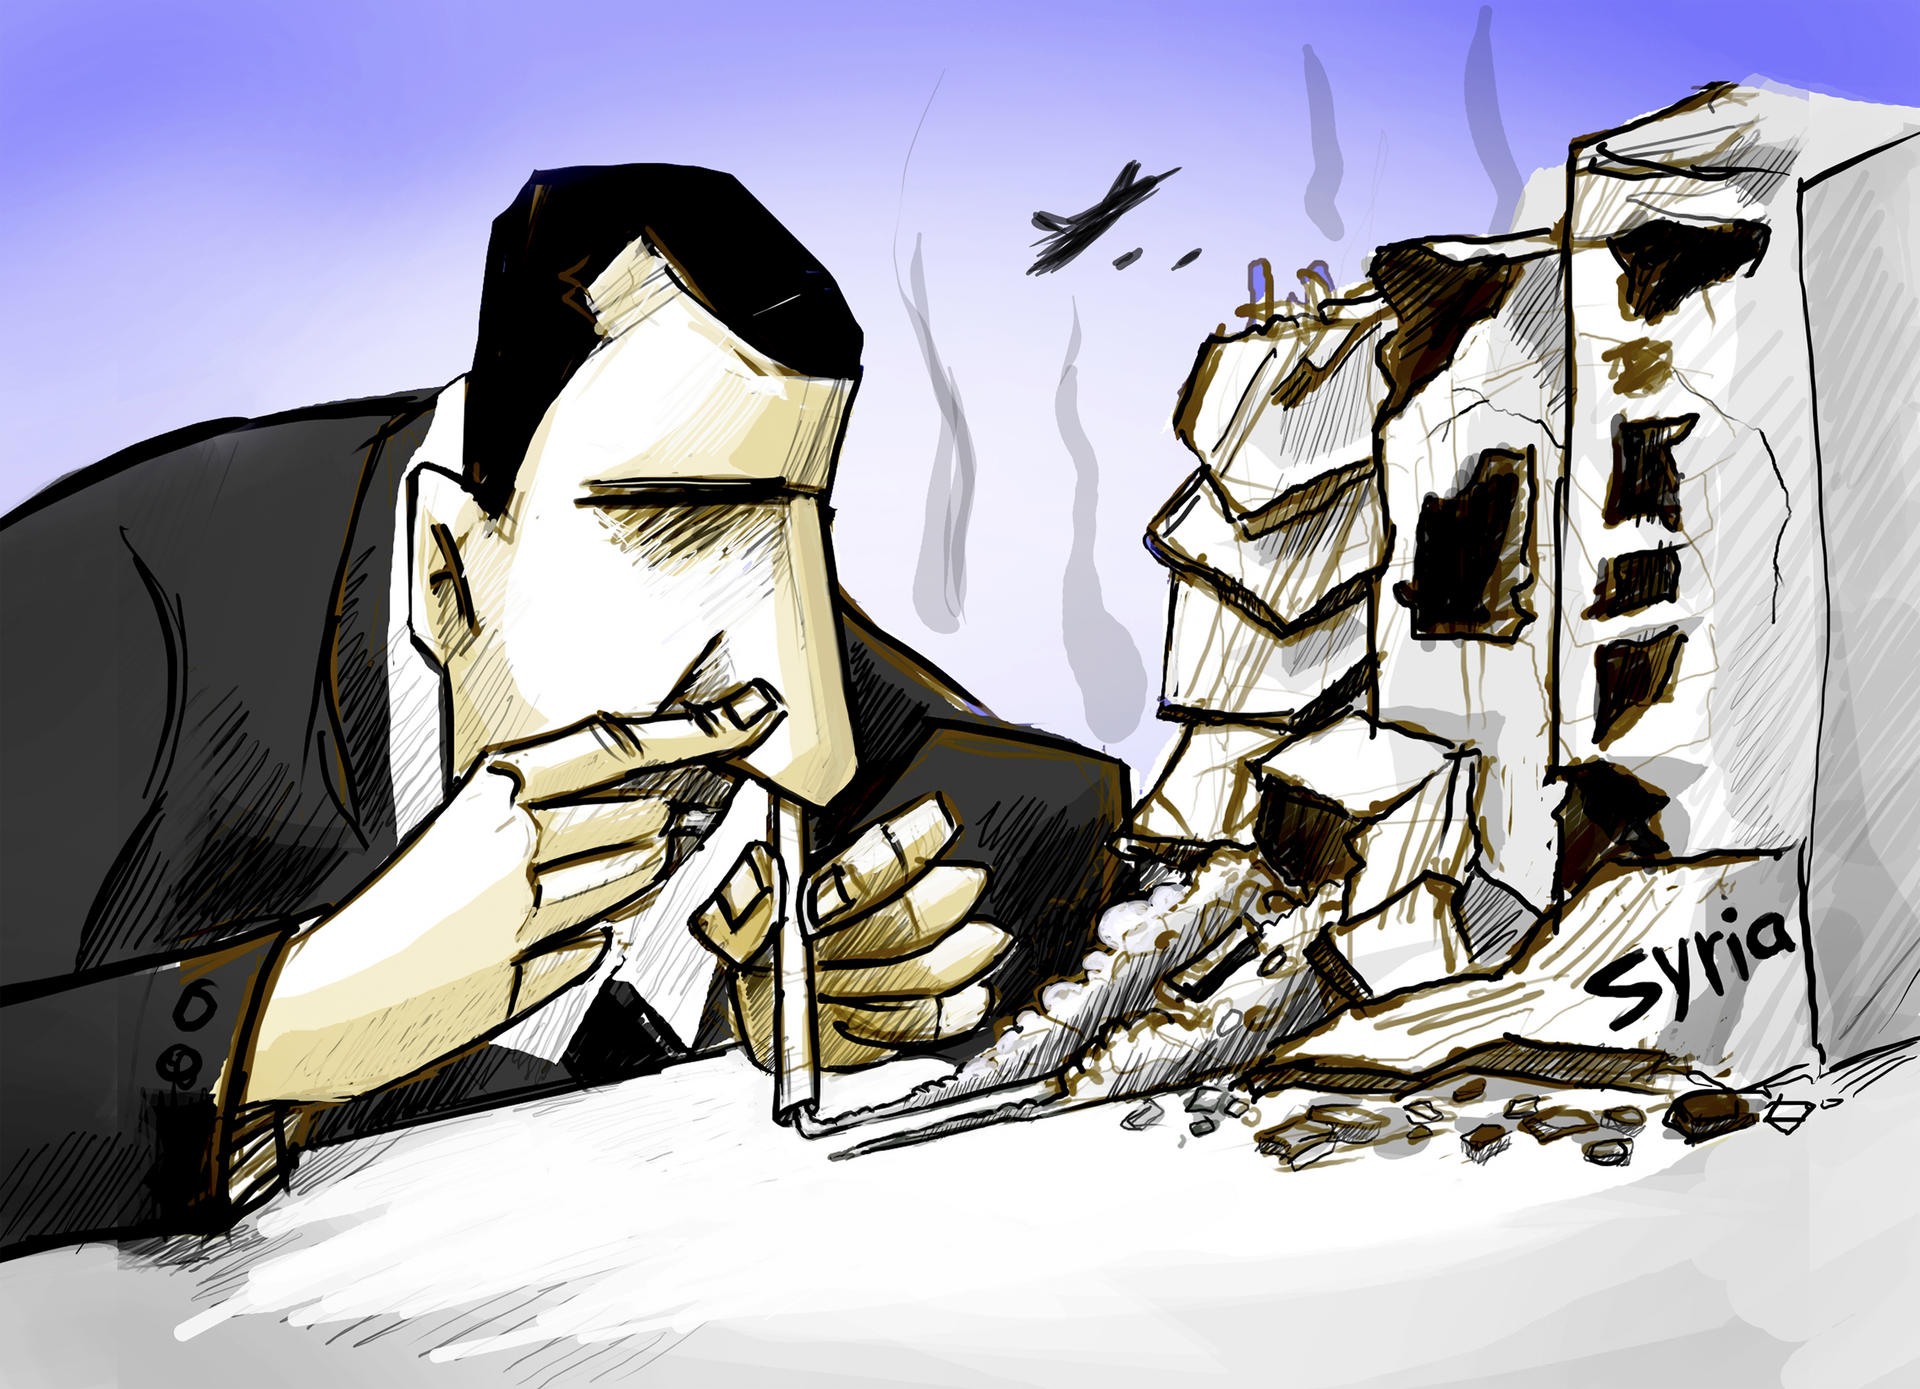 The cover image, by Amjad Wardeh, of a book called Art of Resistance: Collected Cartoons from the Syrian War features Syrian President Bashar al-Assad snorting building dust as if it were cocaine.